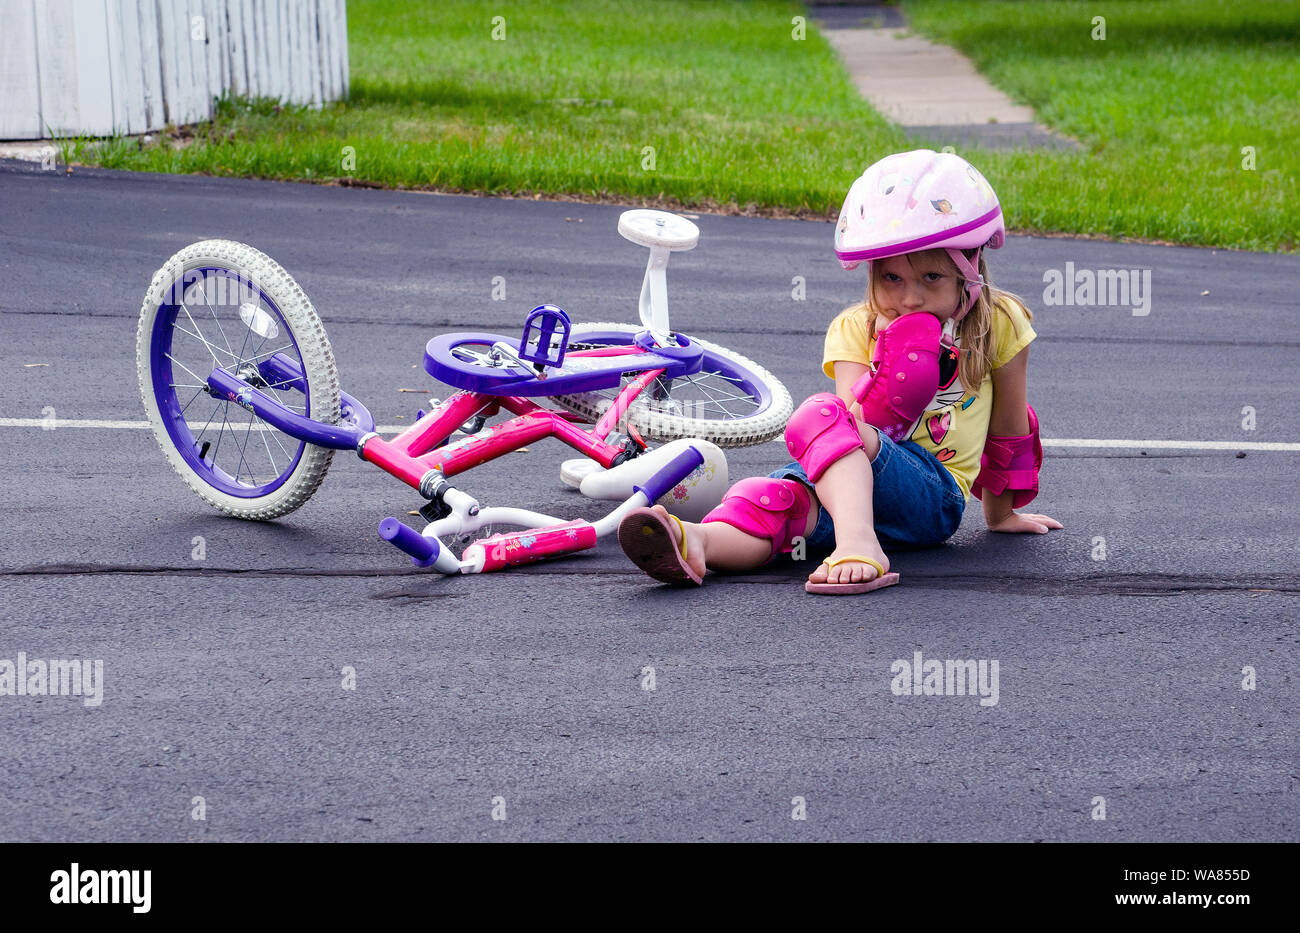 Little girl sits on the ground in helmet and safety gear, after falling off her bike, while learning to ride with training wheels Stock Photo